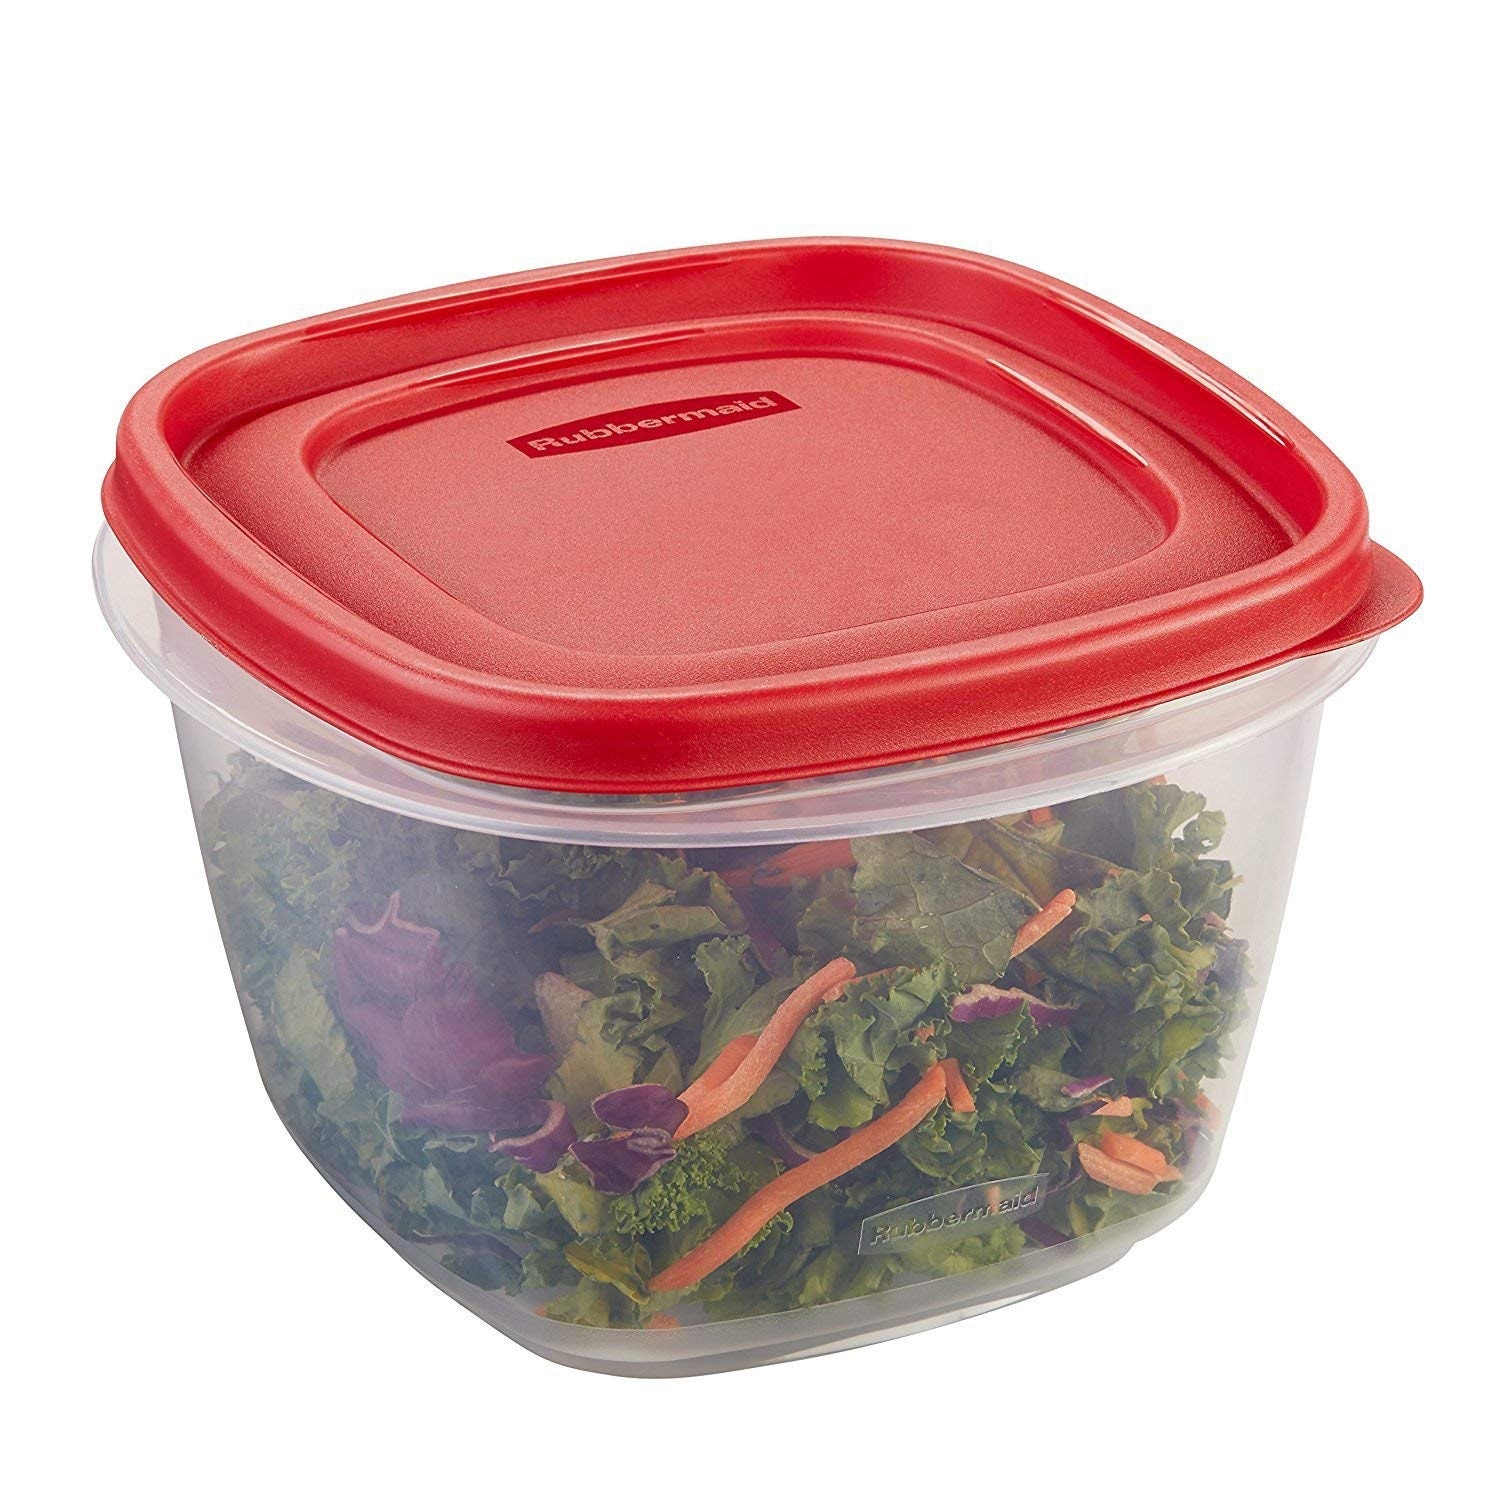 https://ak1.ostkcdn.com/images/products/is/images/direct/13307575dc29ea95afad5b93a06d0b43b91b1c2a/Rubbermaid-Easy-Find-Lid-Food-Storage-Container%2C-7-Cup%2C-Red.jpg